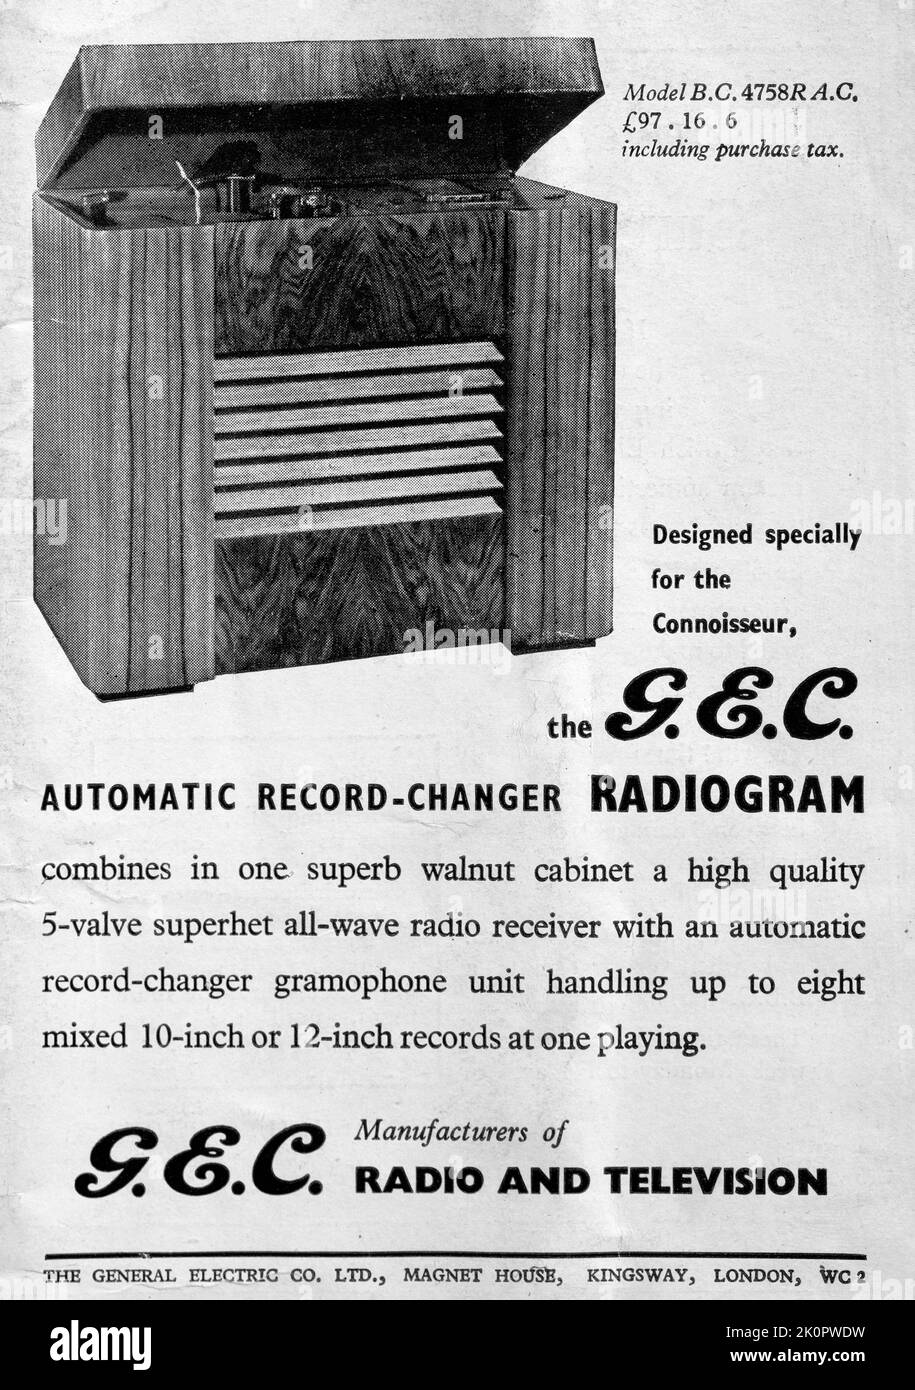 The General Electric Compnay GEC radio and television advert London Illustrated News, 1949 Stock Photo